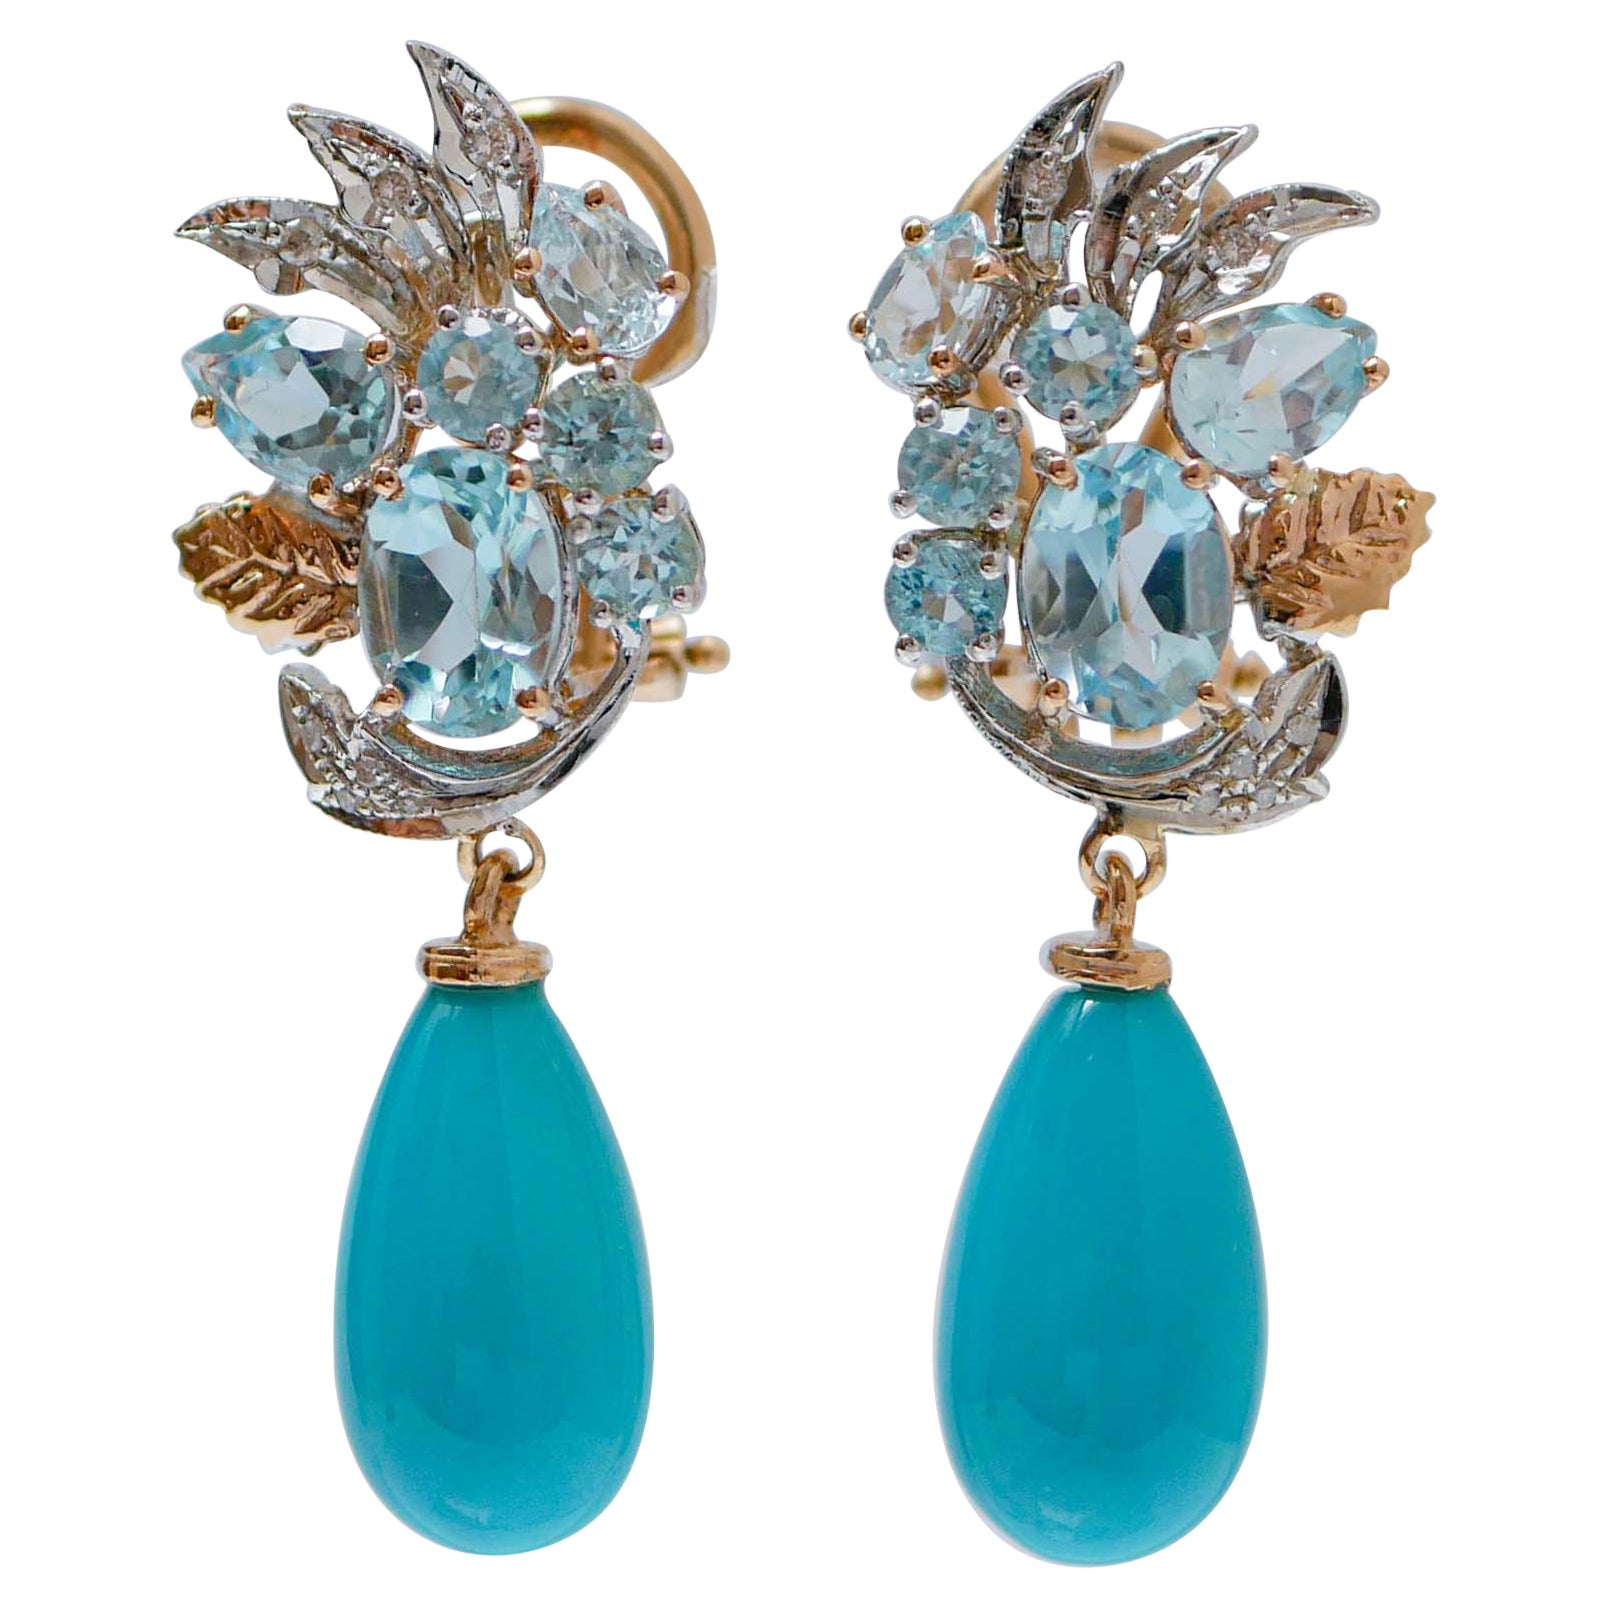 Turquoise, Topazs, Diamonds, 14 Kt White Gold and Rose Gold Earrings. For Sale